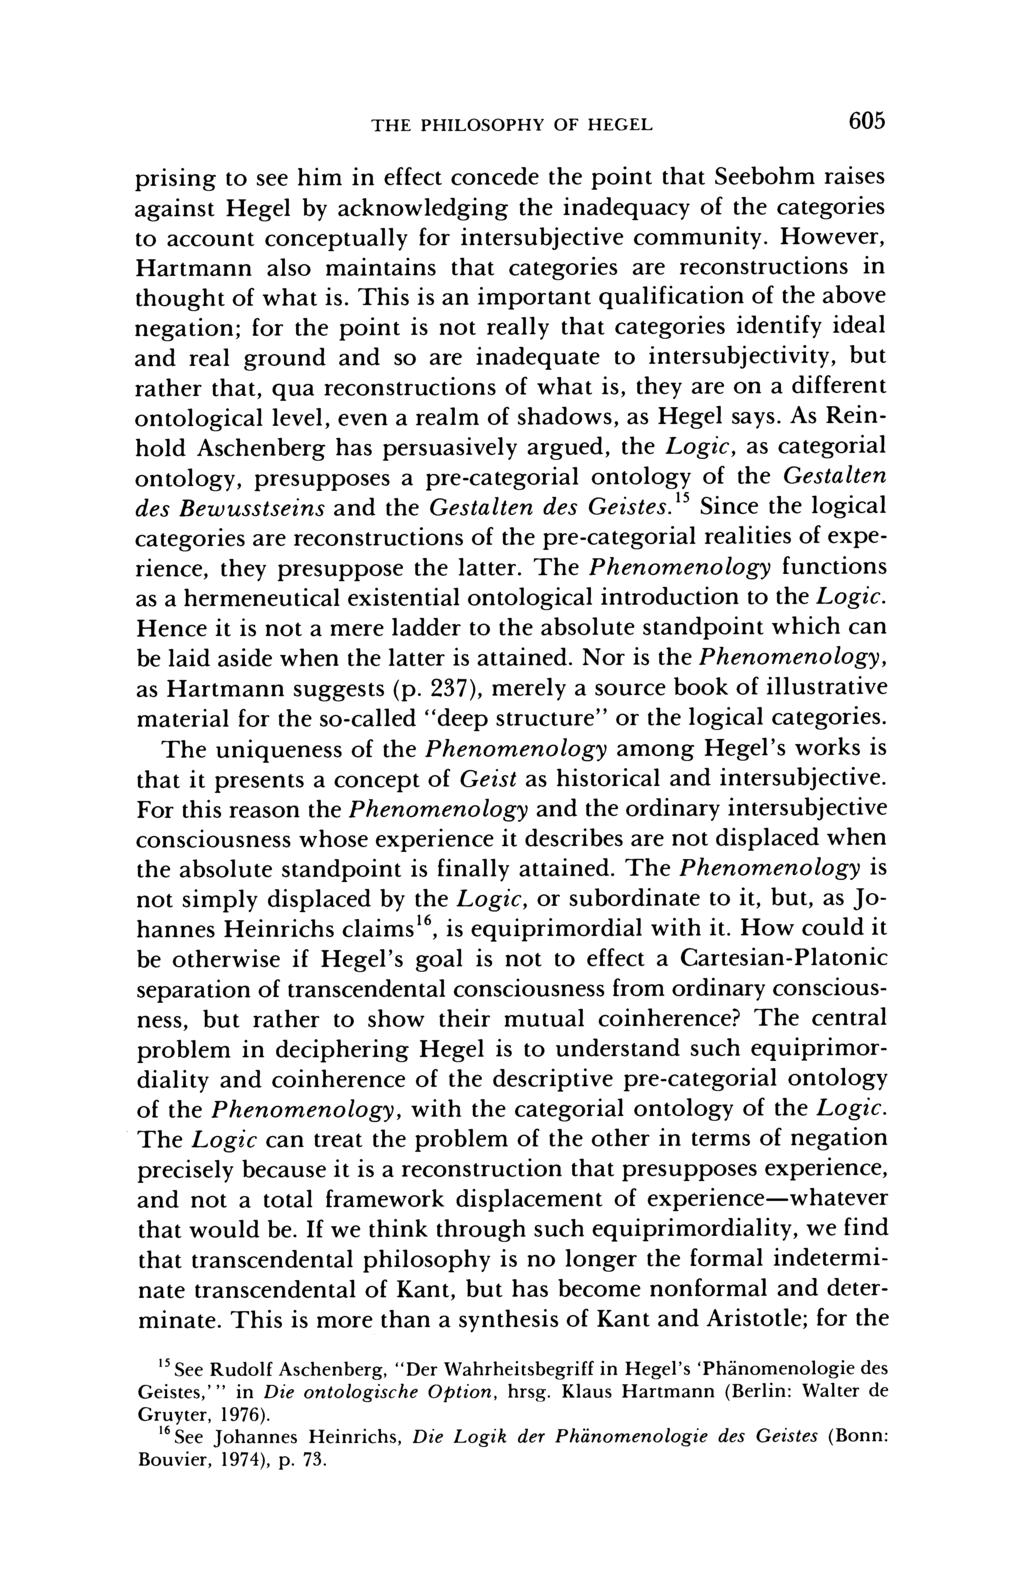 THE PHILOSOPHY OF HEGEL 605 prising to see him in effect concede the point that Seebohm raises against Hegel by acknowledging the inadequacy of the categories to account conceptually for